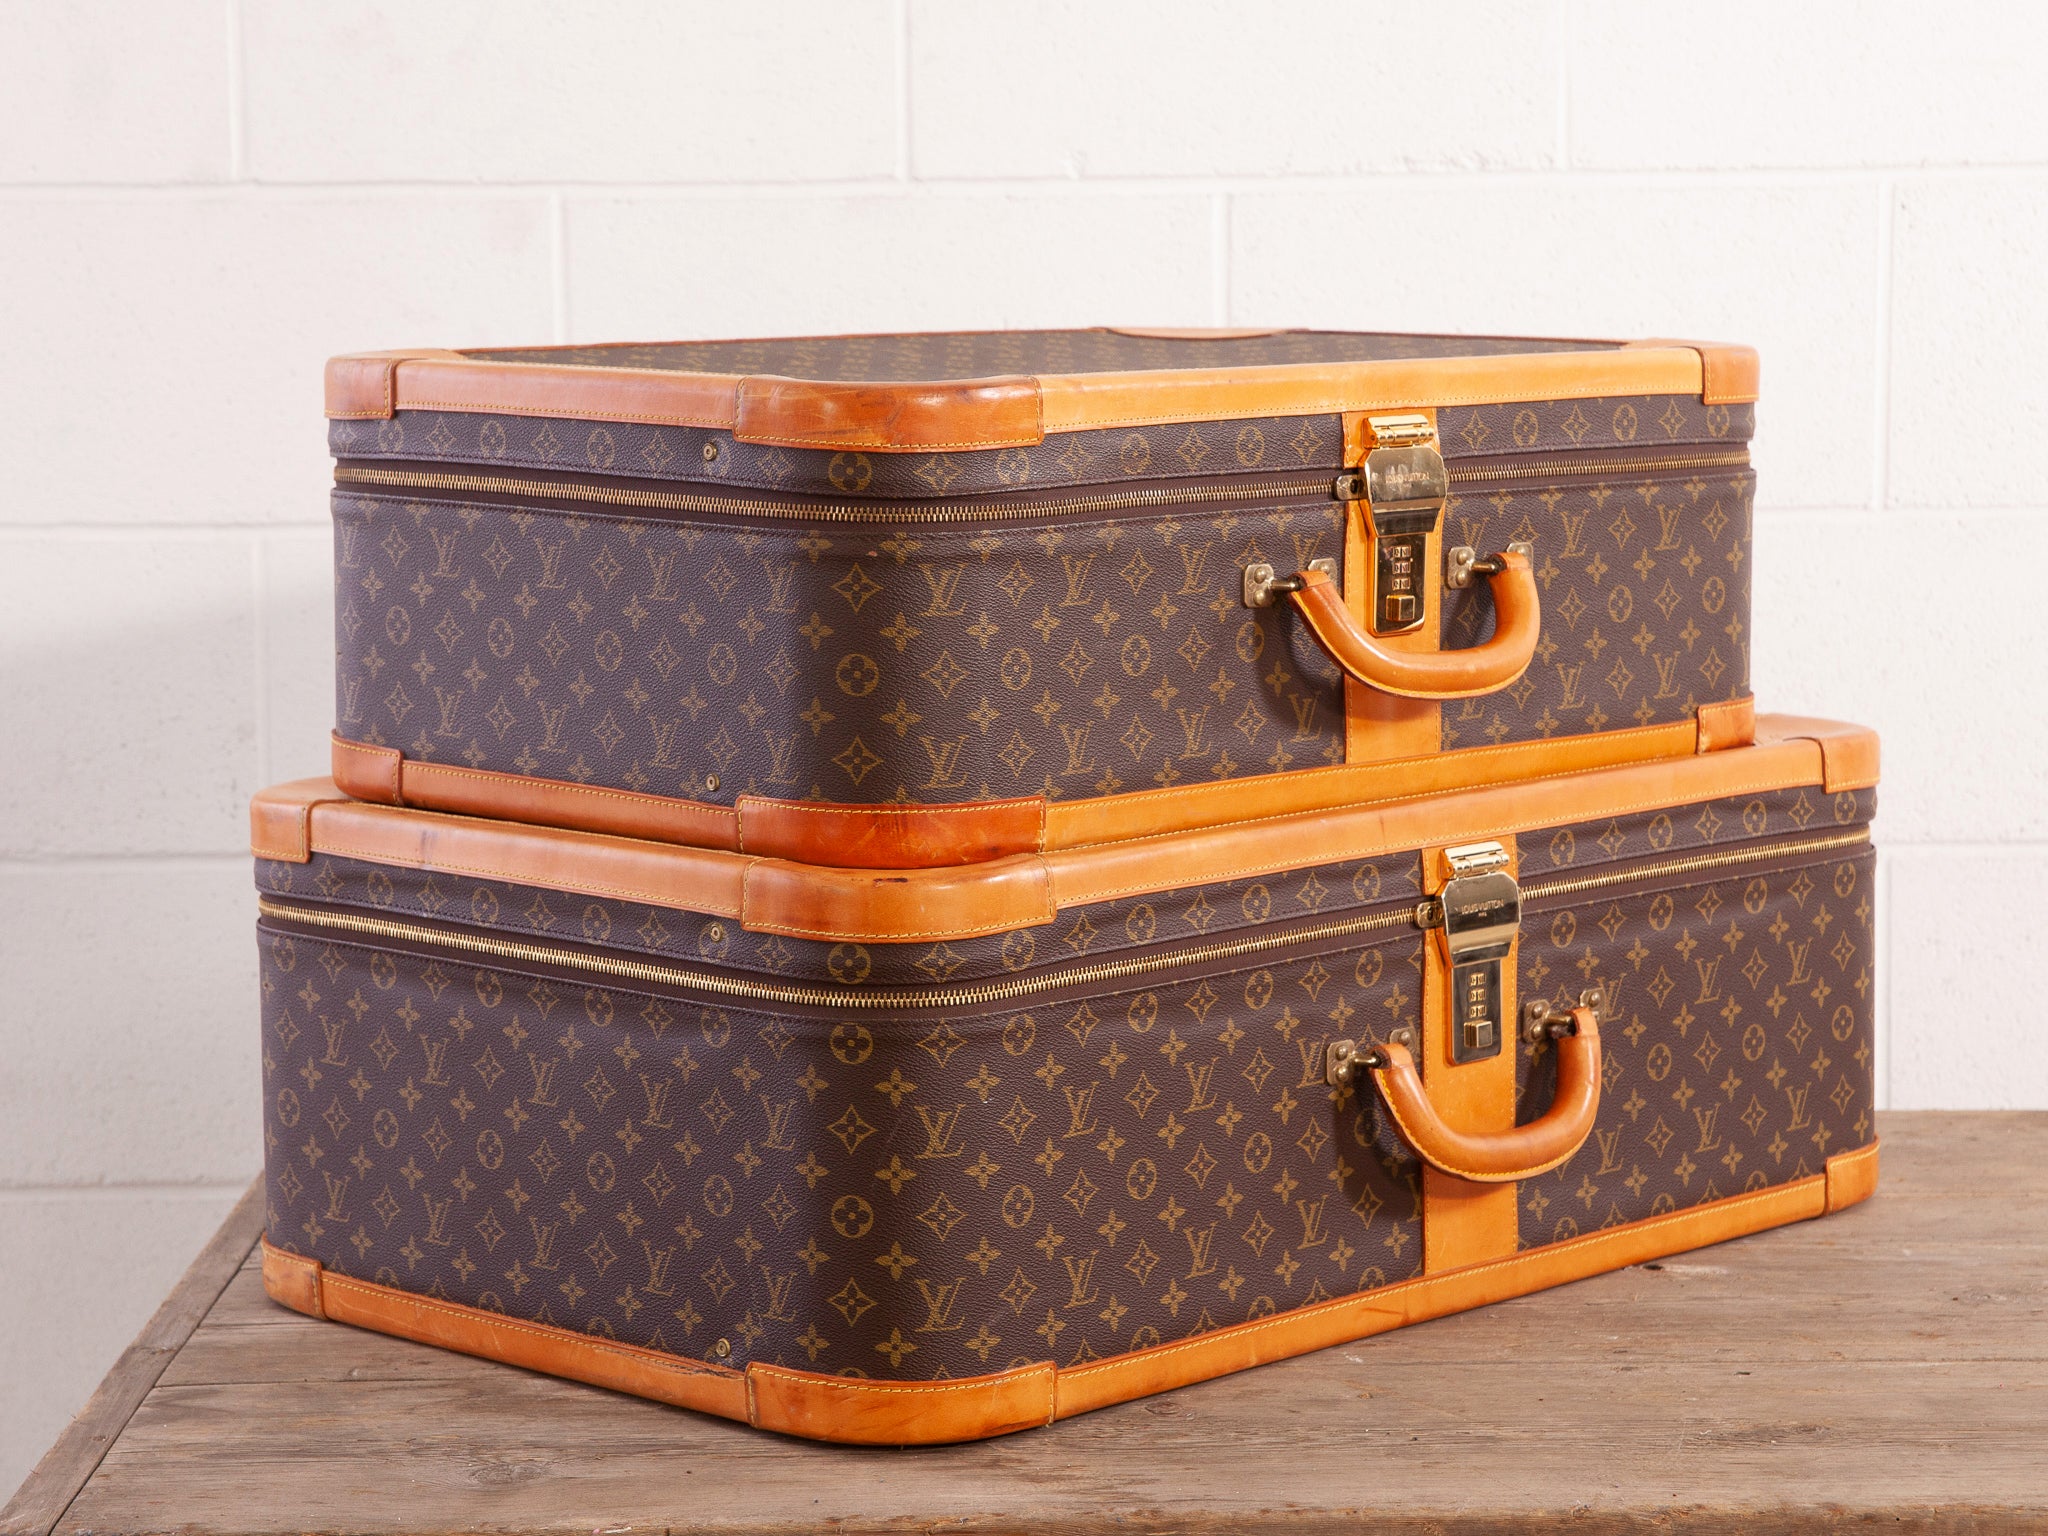 Vintage Louis Vuitton Suitcase - Lost and Found